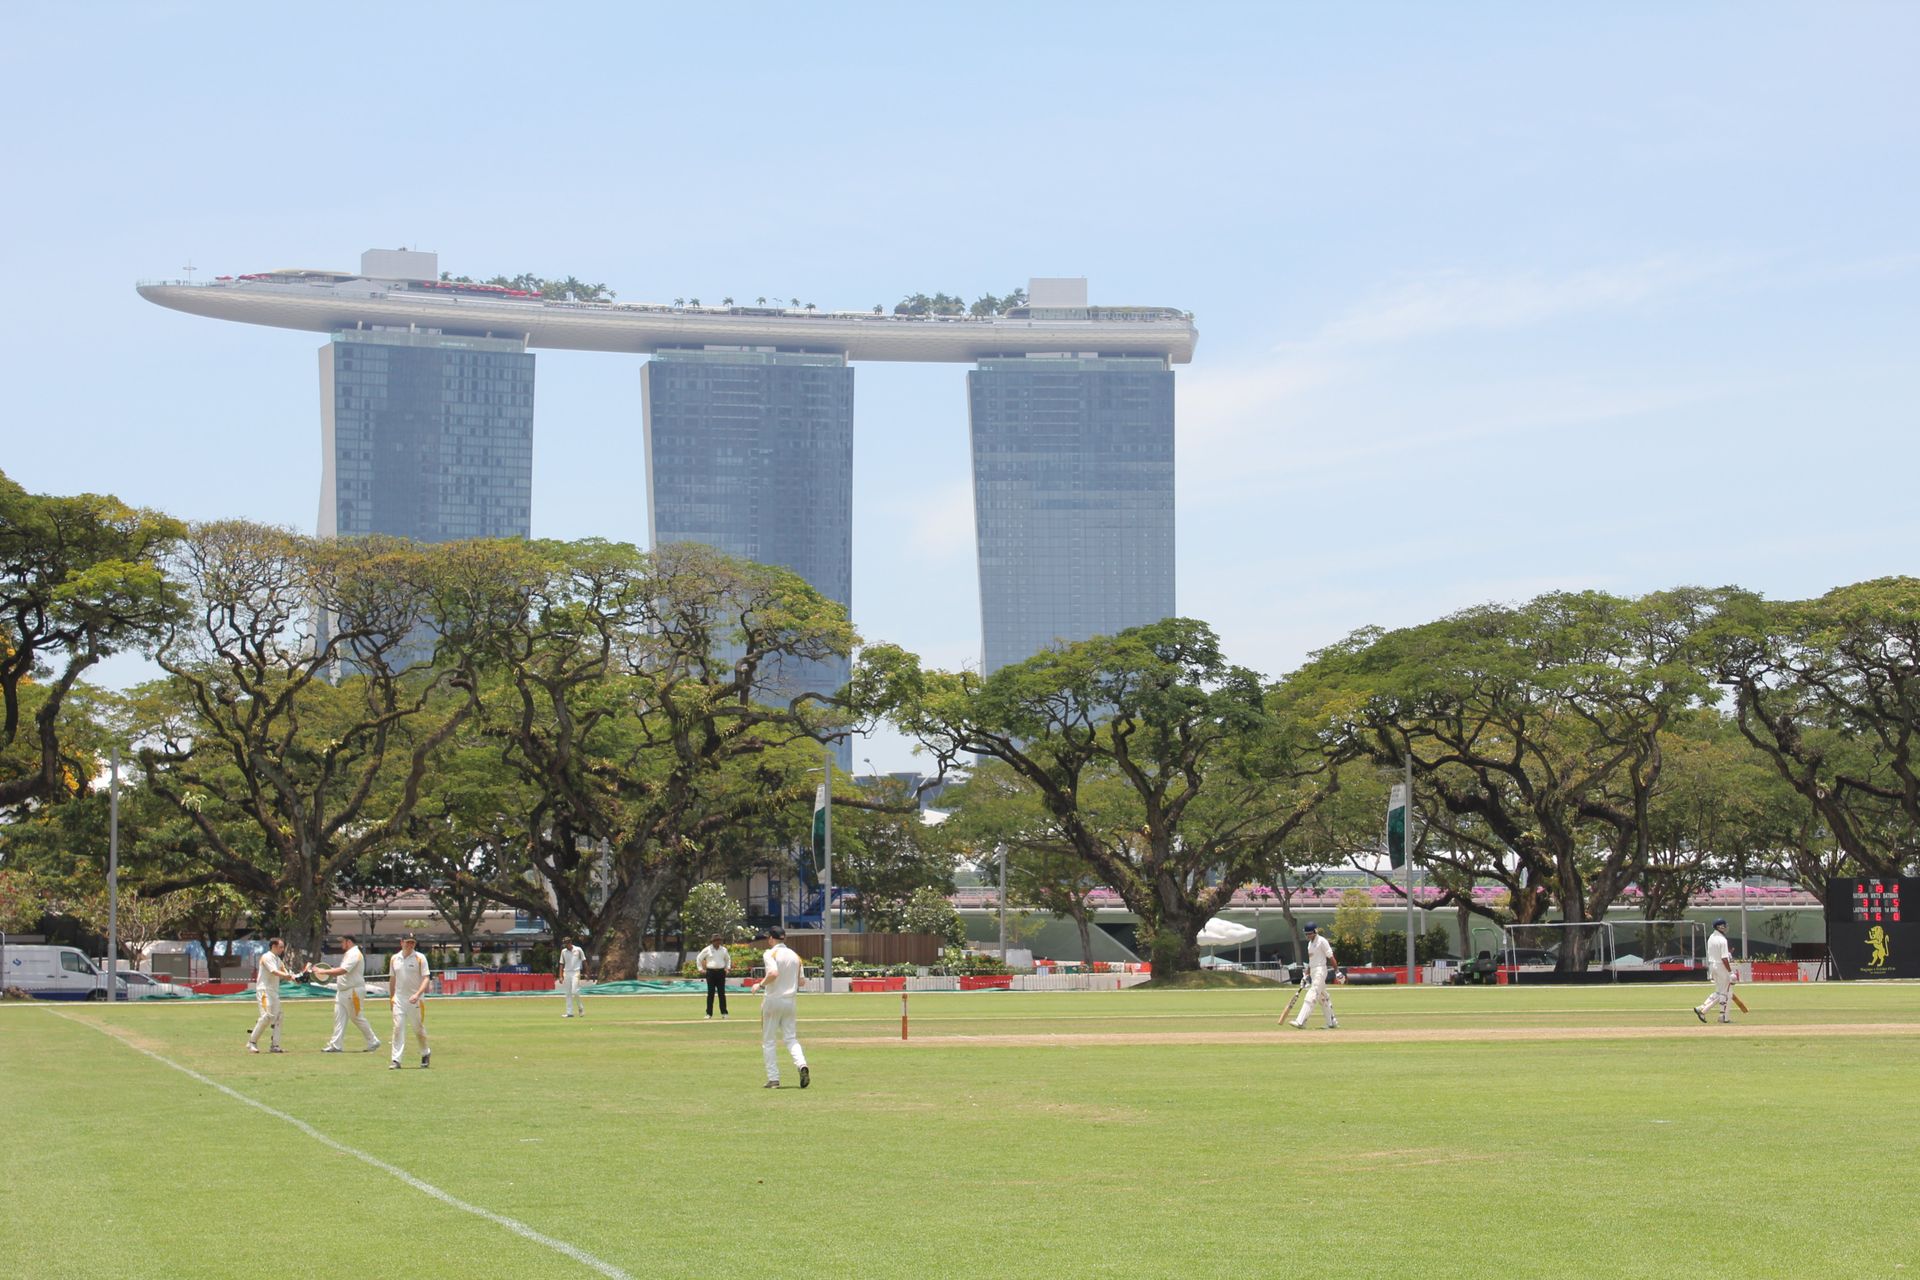 Cricket Pitch in Singapore